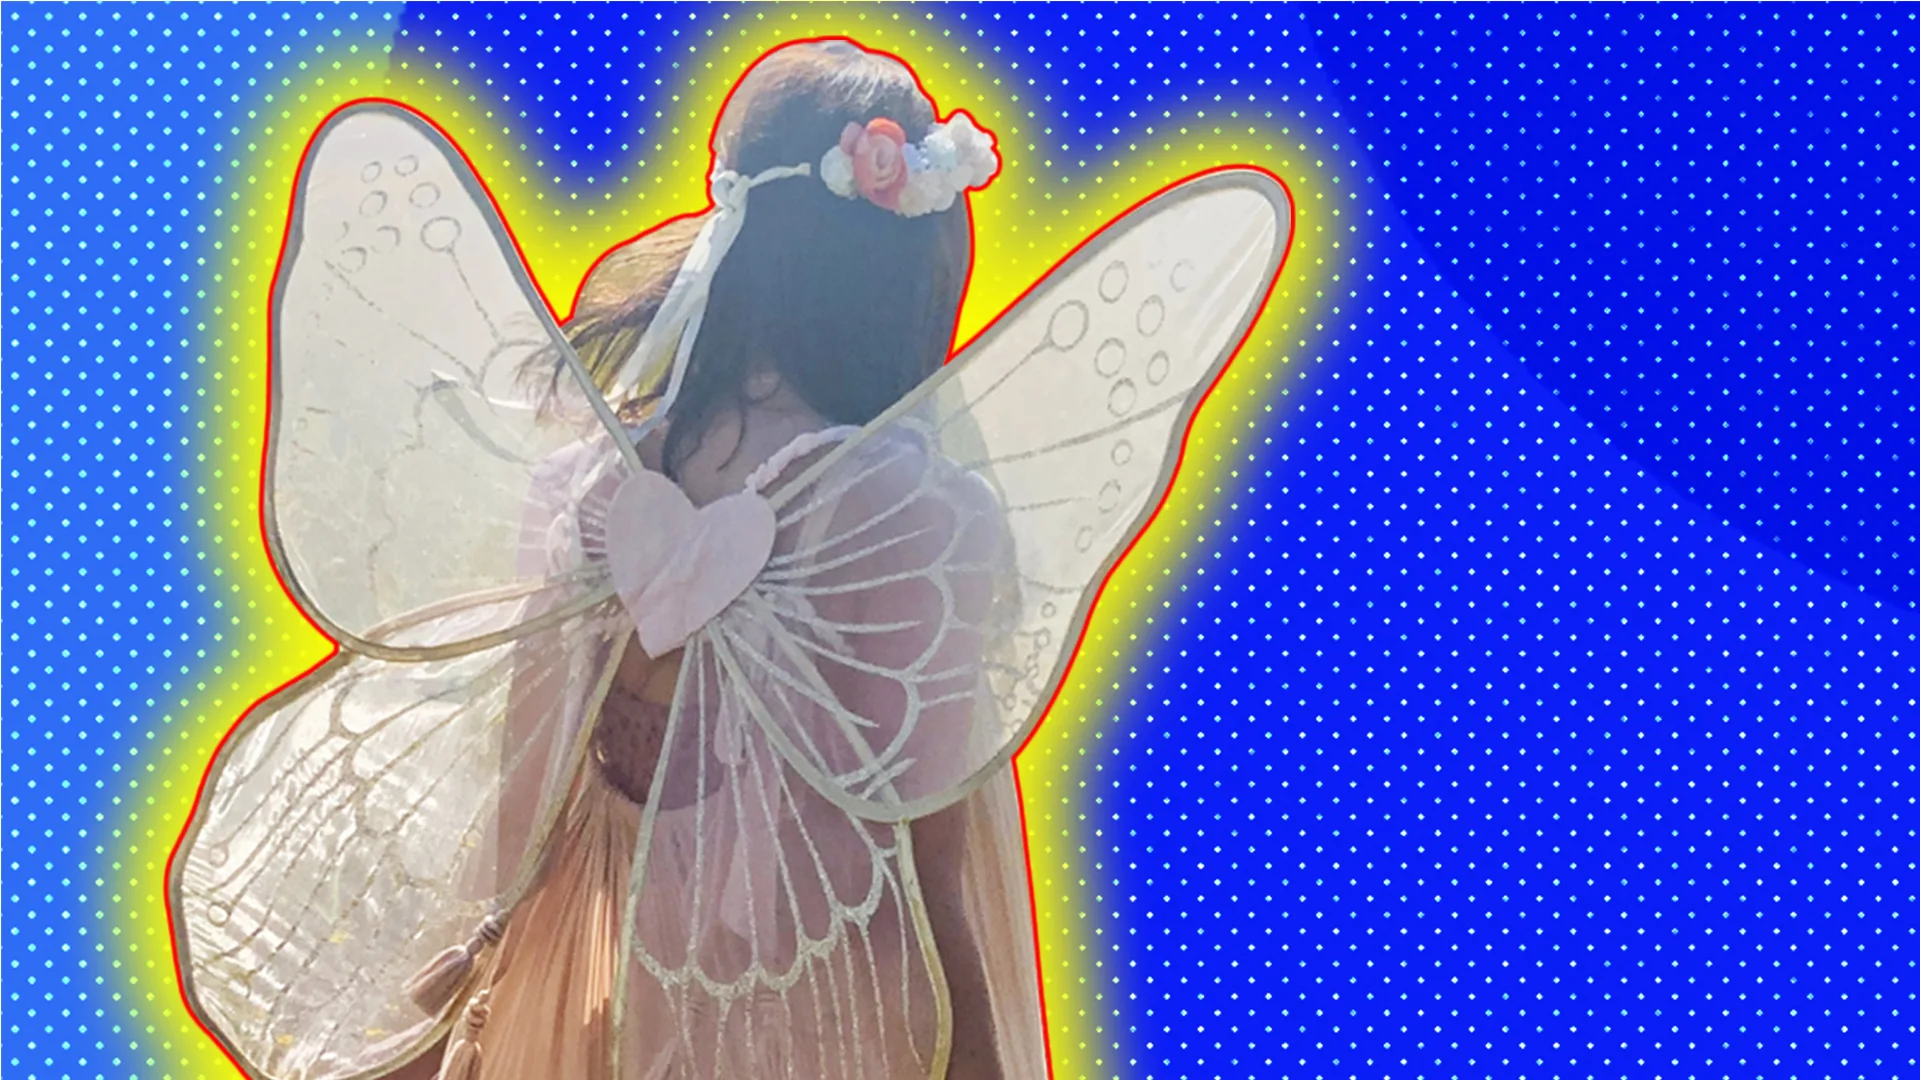 Fairy costume from the back with a polkadot background and a glow around the image